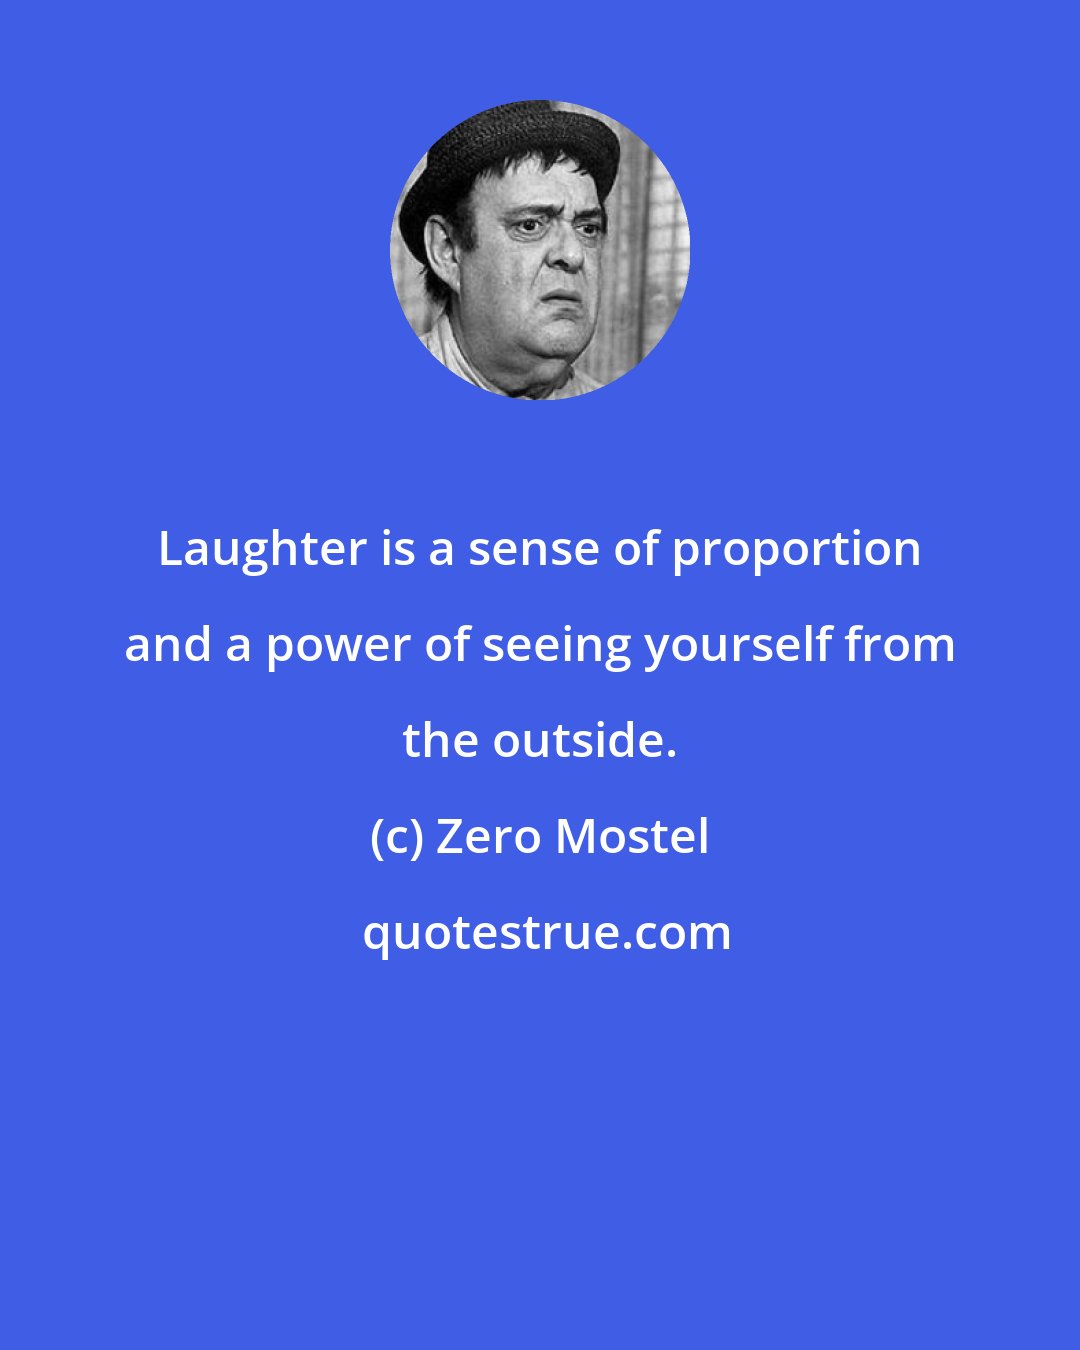 Zero Mostel: Laughter is a sense of proportion and a power of seeing yourself from the outside.